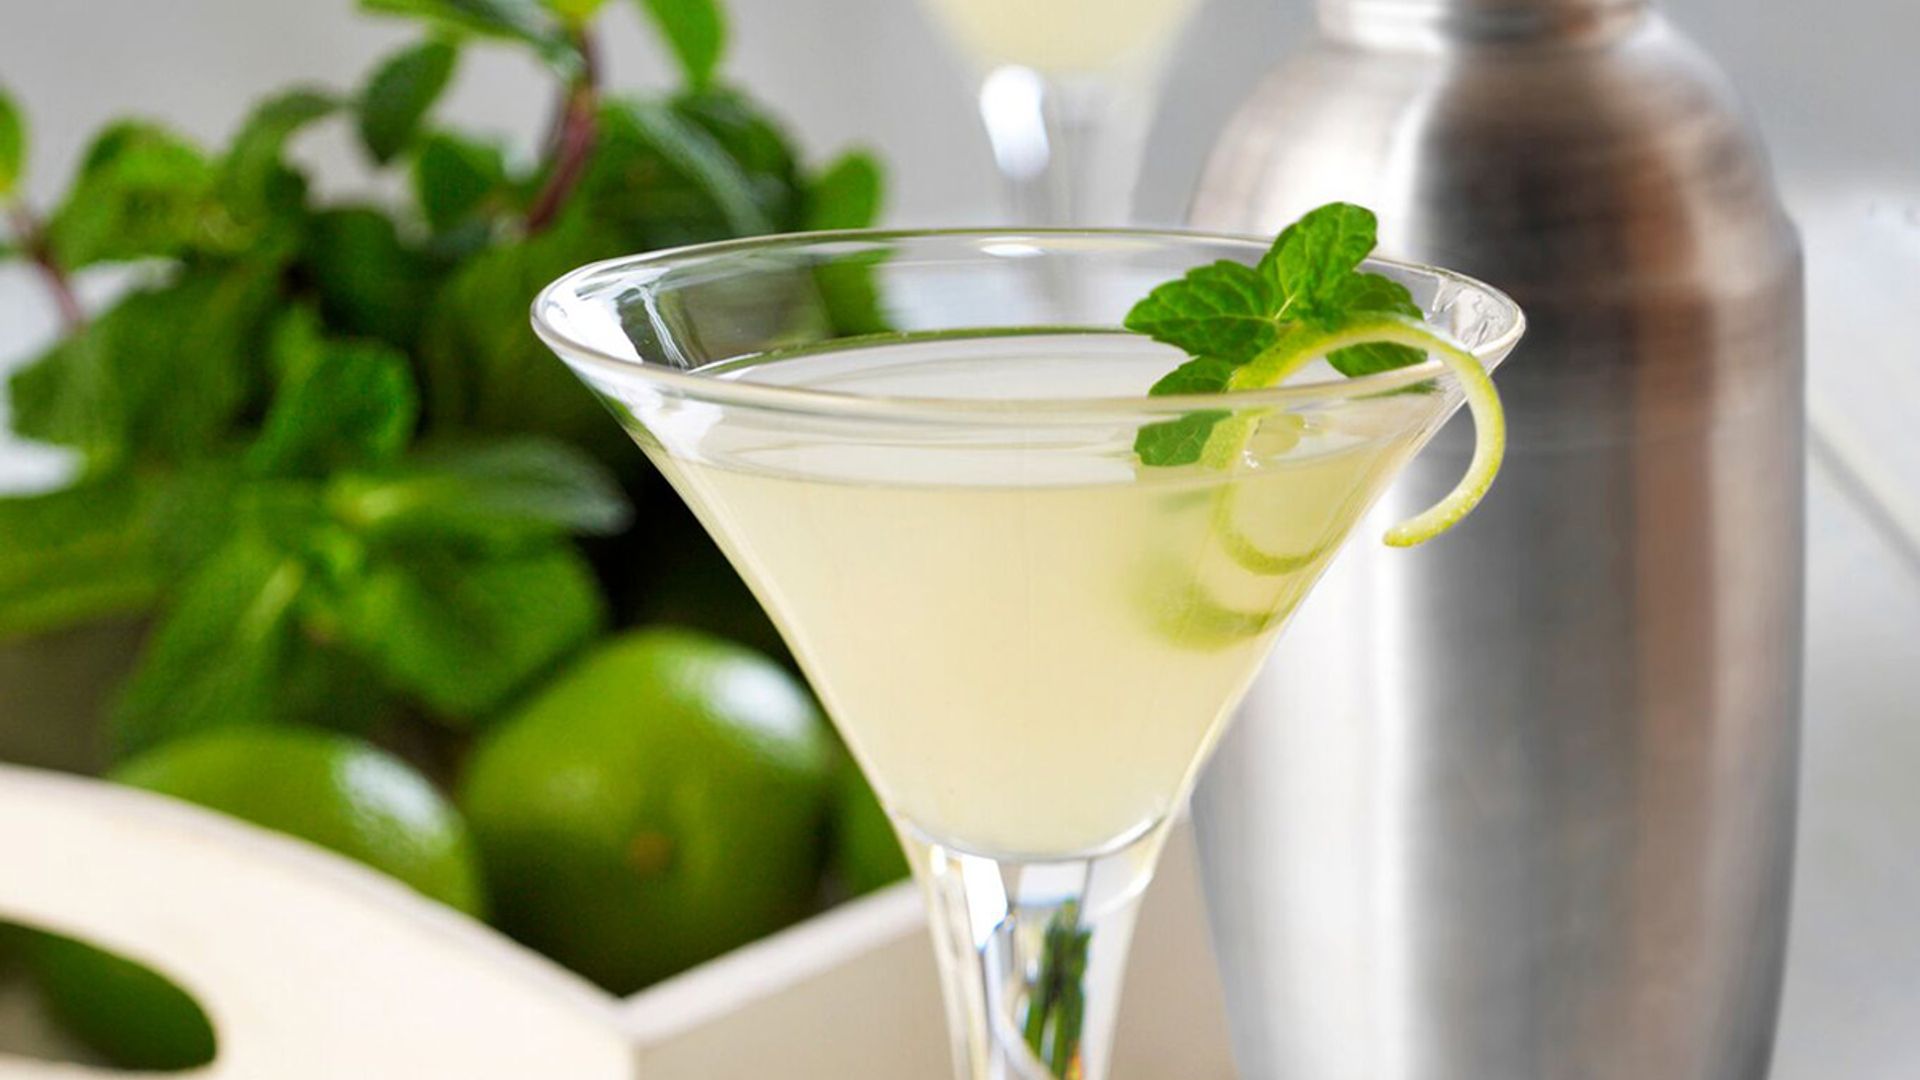 Turn your Friday into FriYAY with this DELICIOUS elderflower and mint daiquiri recipe